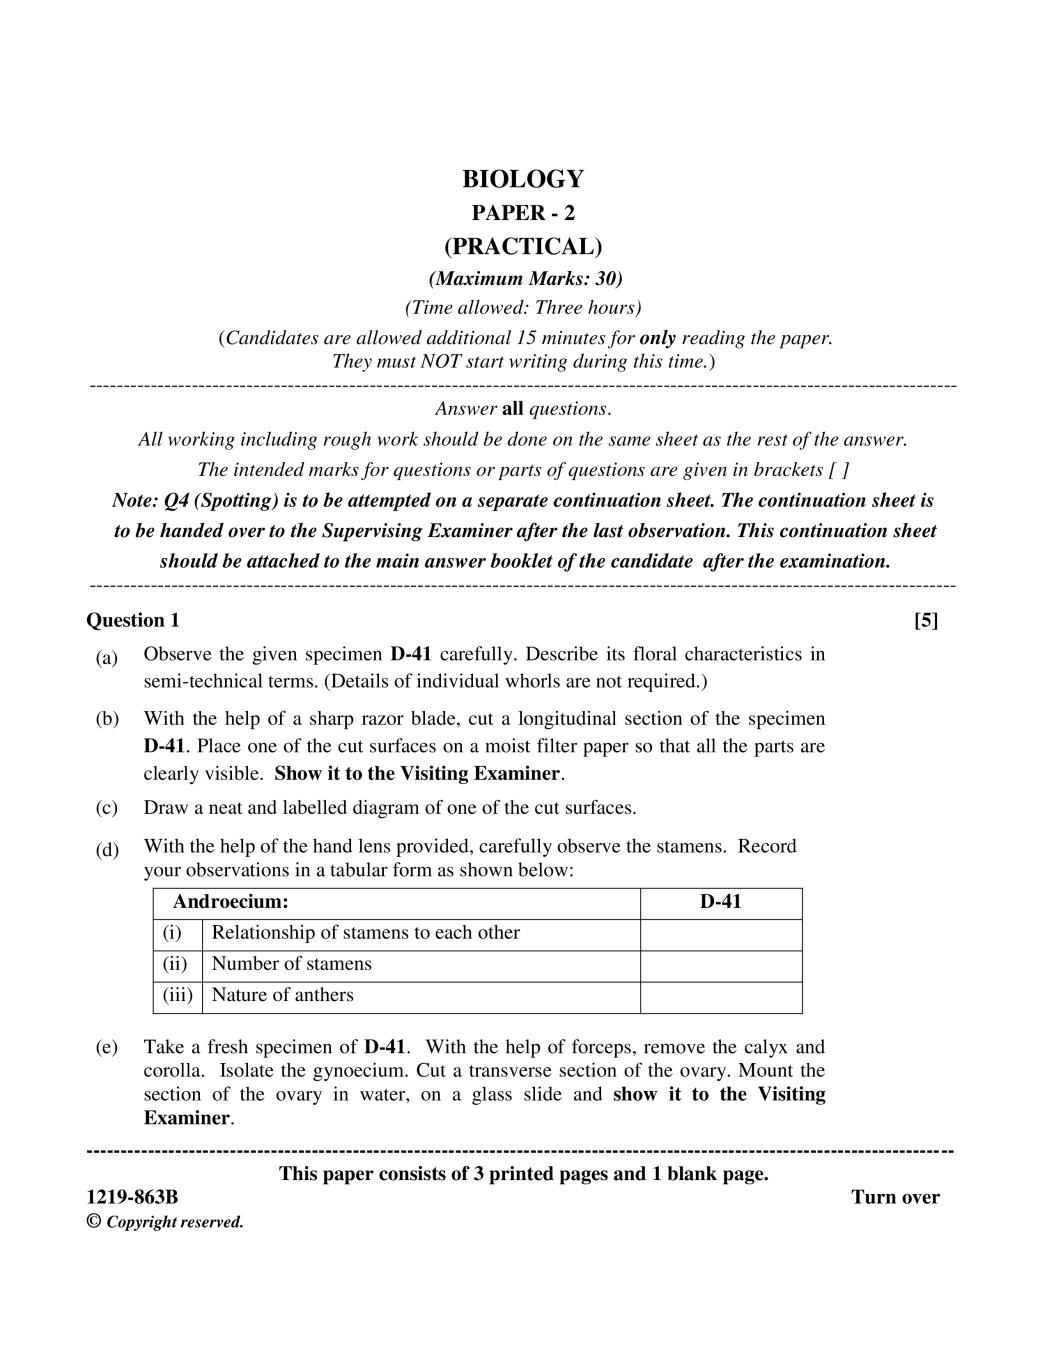 ISC Class 12 Question Paper 2019 for Biology Paper 2 - Page 1